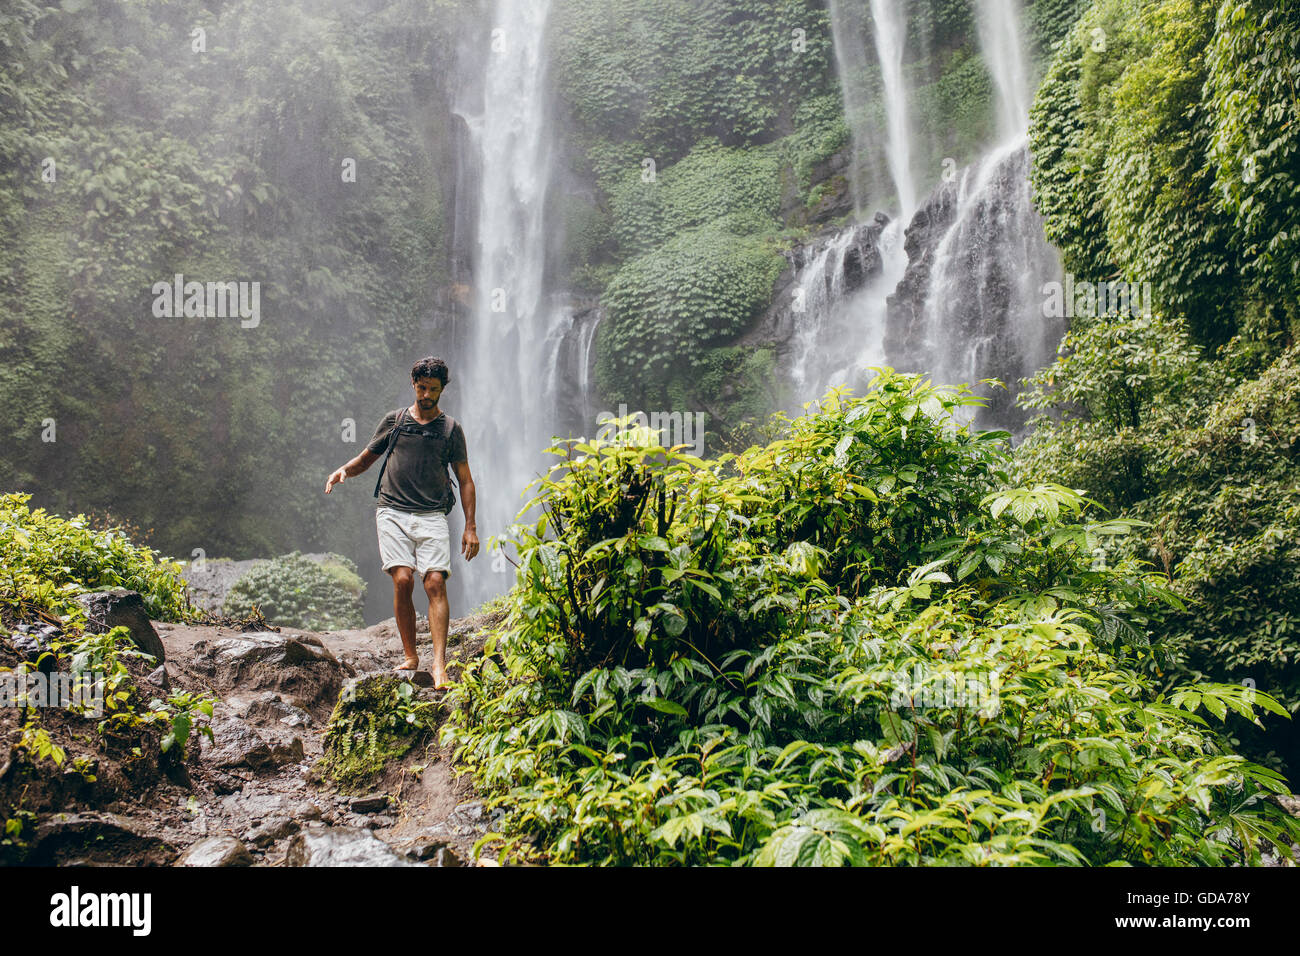 Outdoors shot of young man walking along mountain trail. Male hiker hiking in forest with waterfall in background. Stock Photo